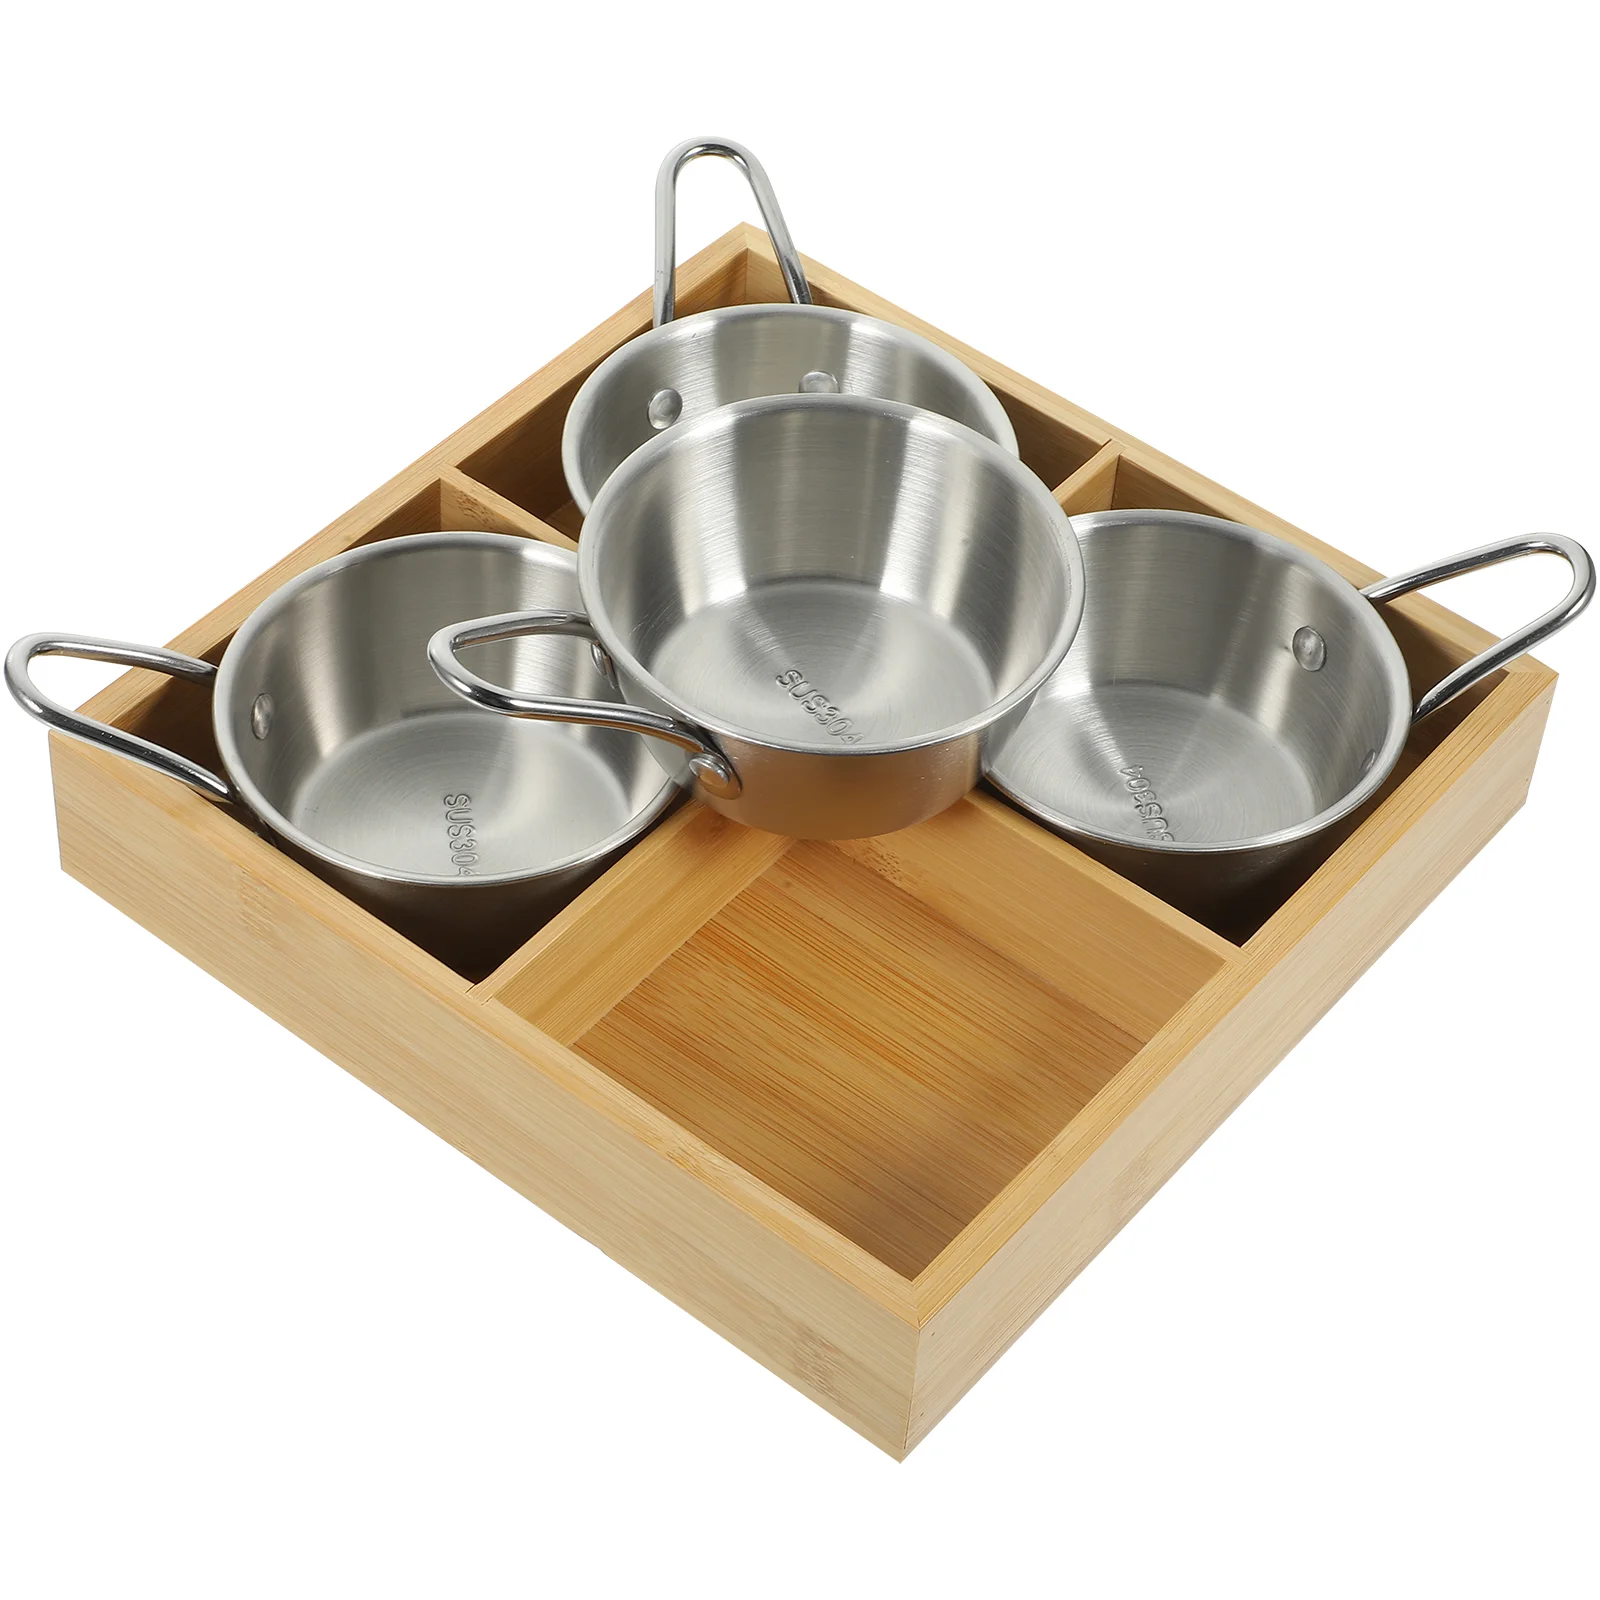 

Dinner Plates Hot Pot Tray Kitchen Wood Ware Tableware Serving Stainless Steel Container Vegetable